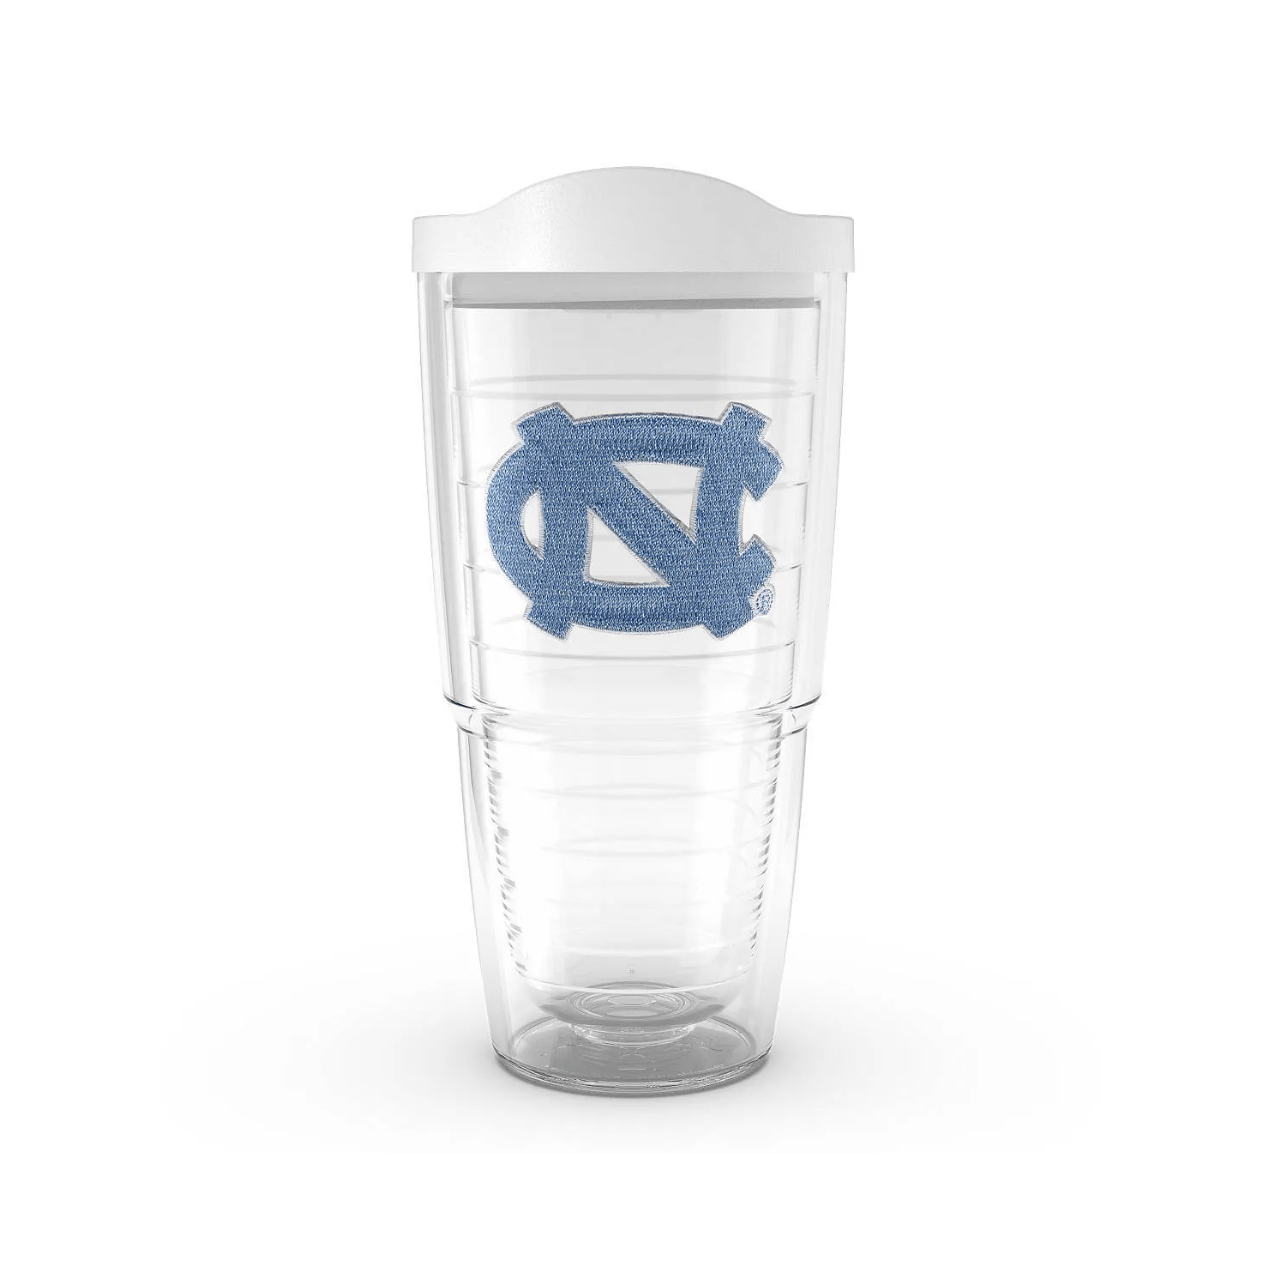 Tervis Tumbler Tervis Tumbler 24 oz University of North Carolina with White Lid